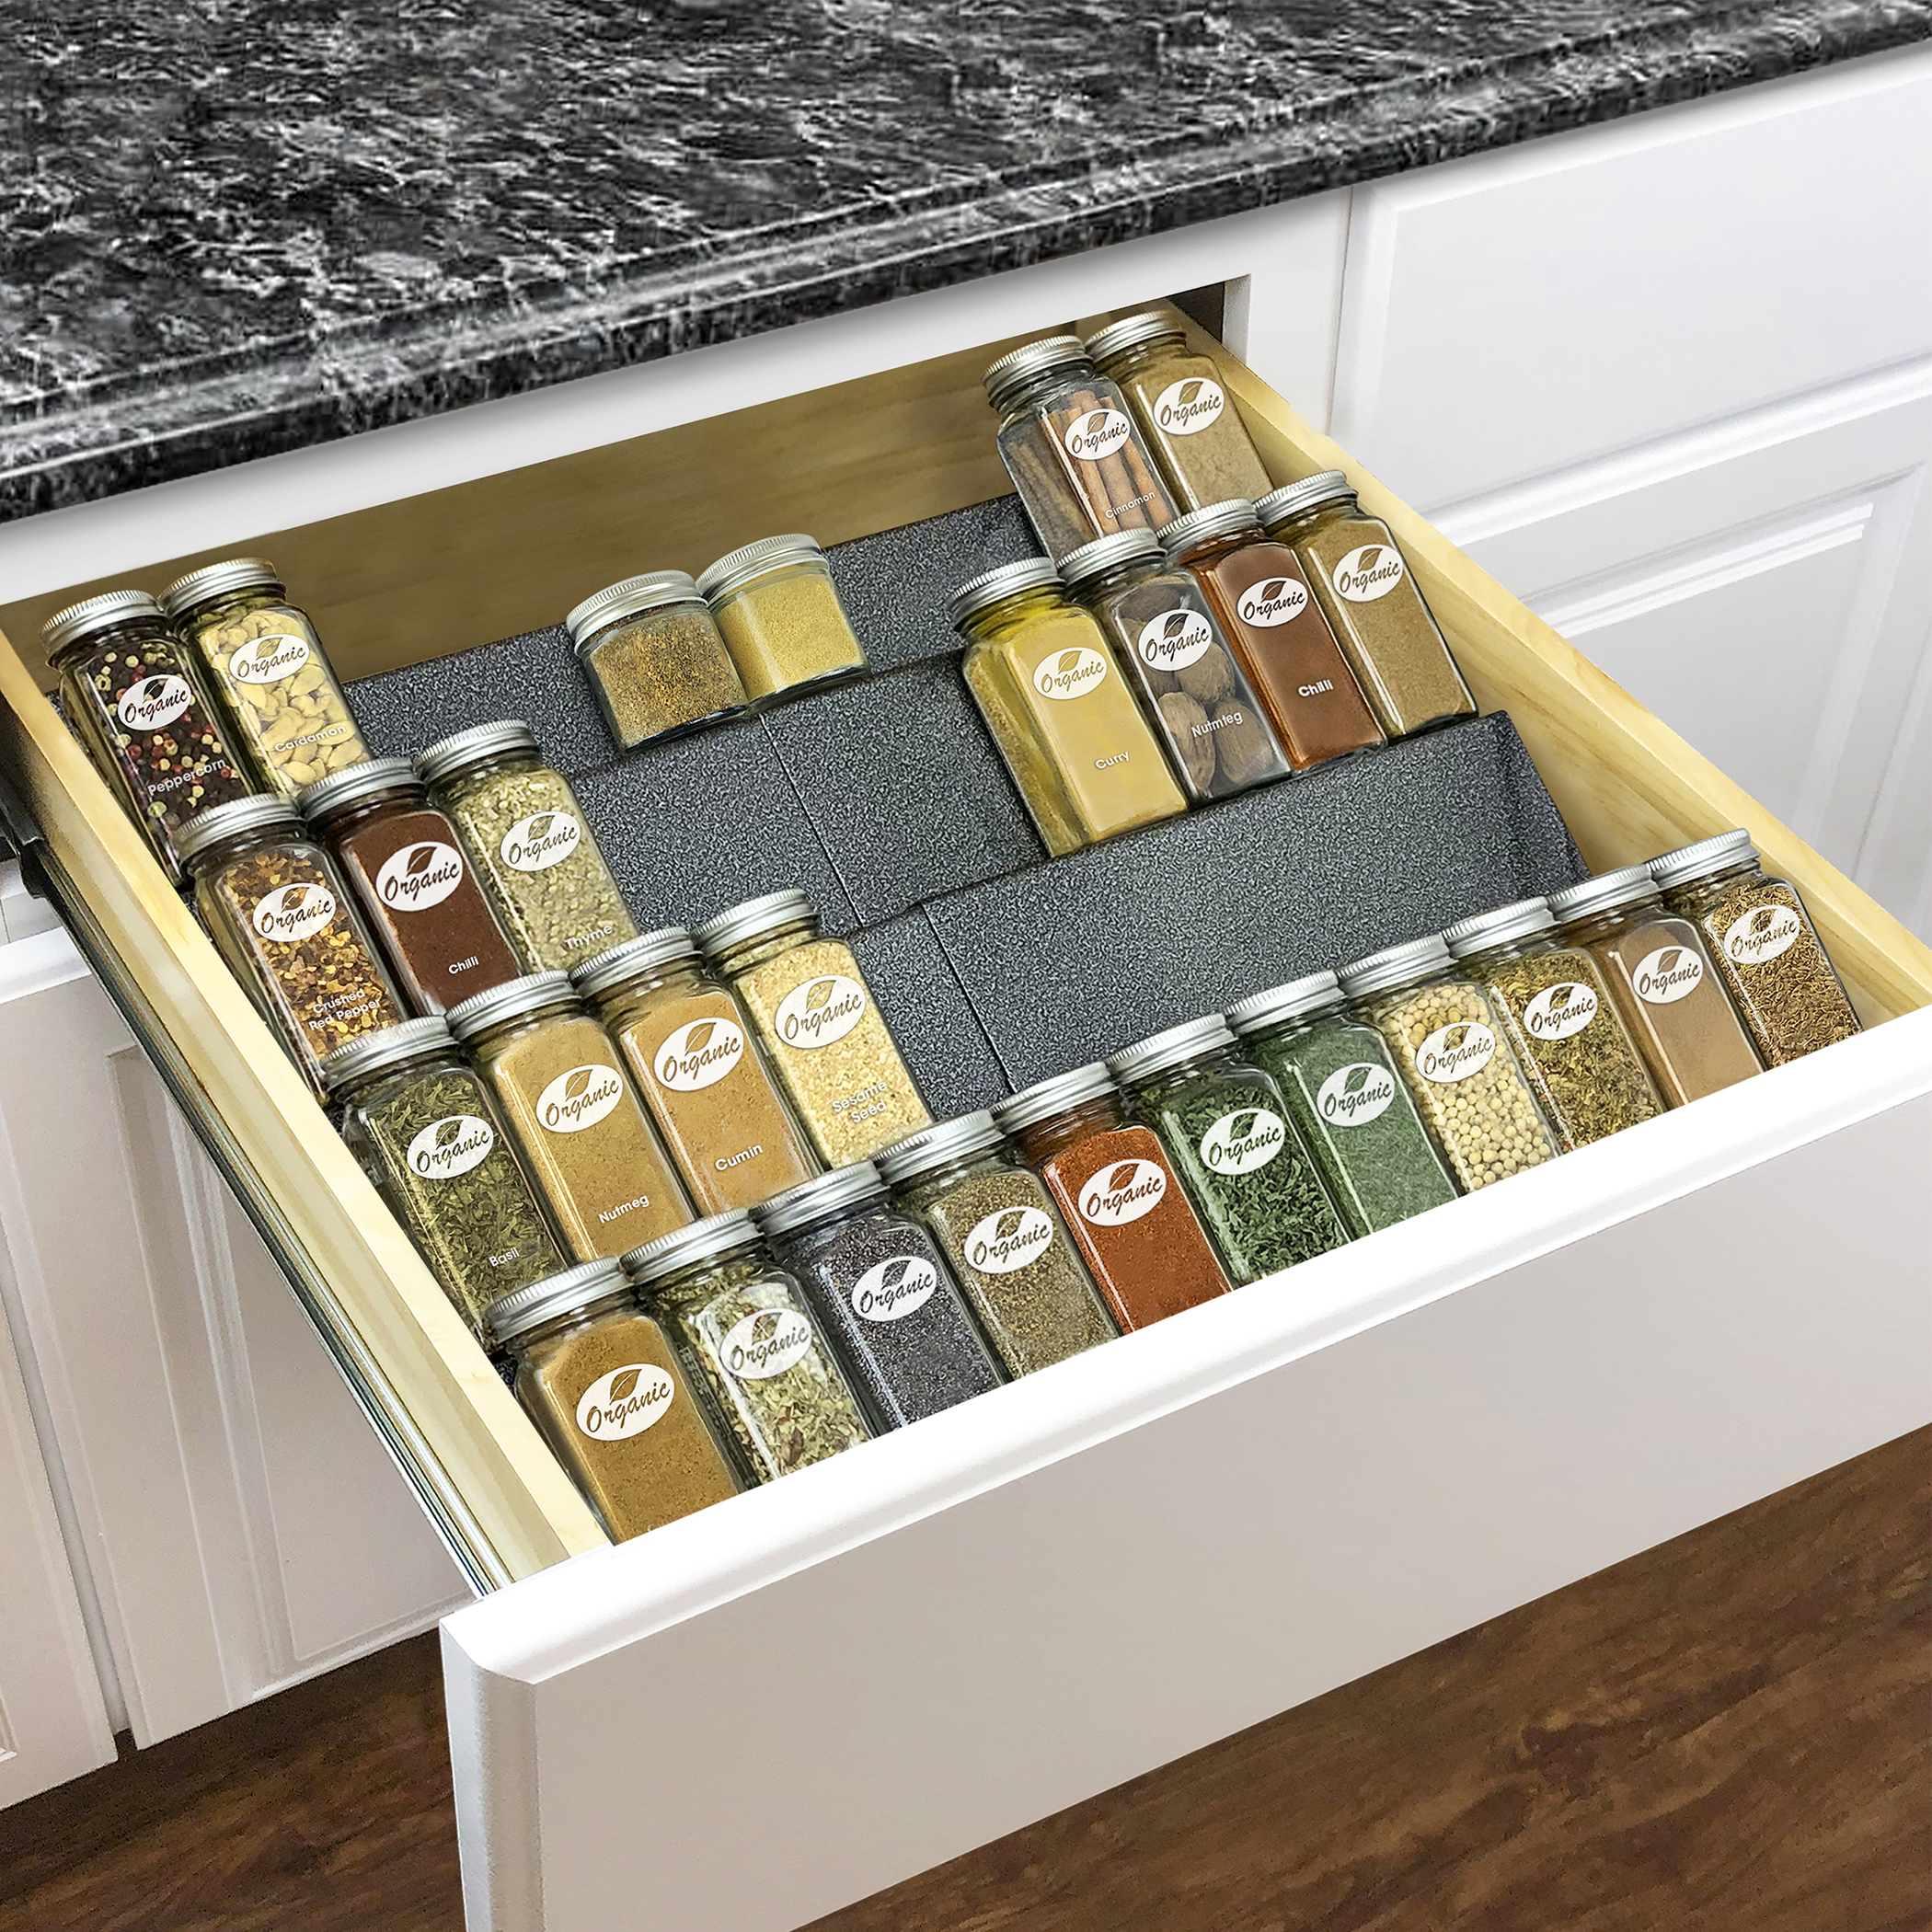 VANGAY Spice Rack Drawer, 4 Tier Expands From 13 To 26 Drawer Spice  Organizer For Jars And Packets, Adjustable Storage Salt, Seasoning(Metallic